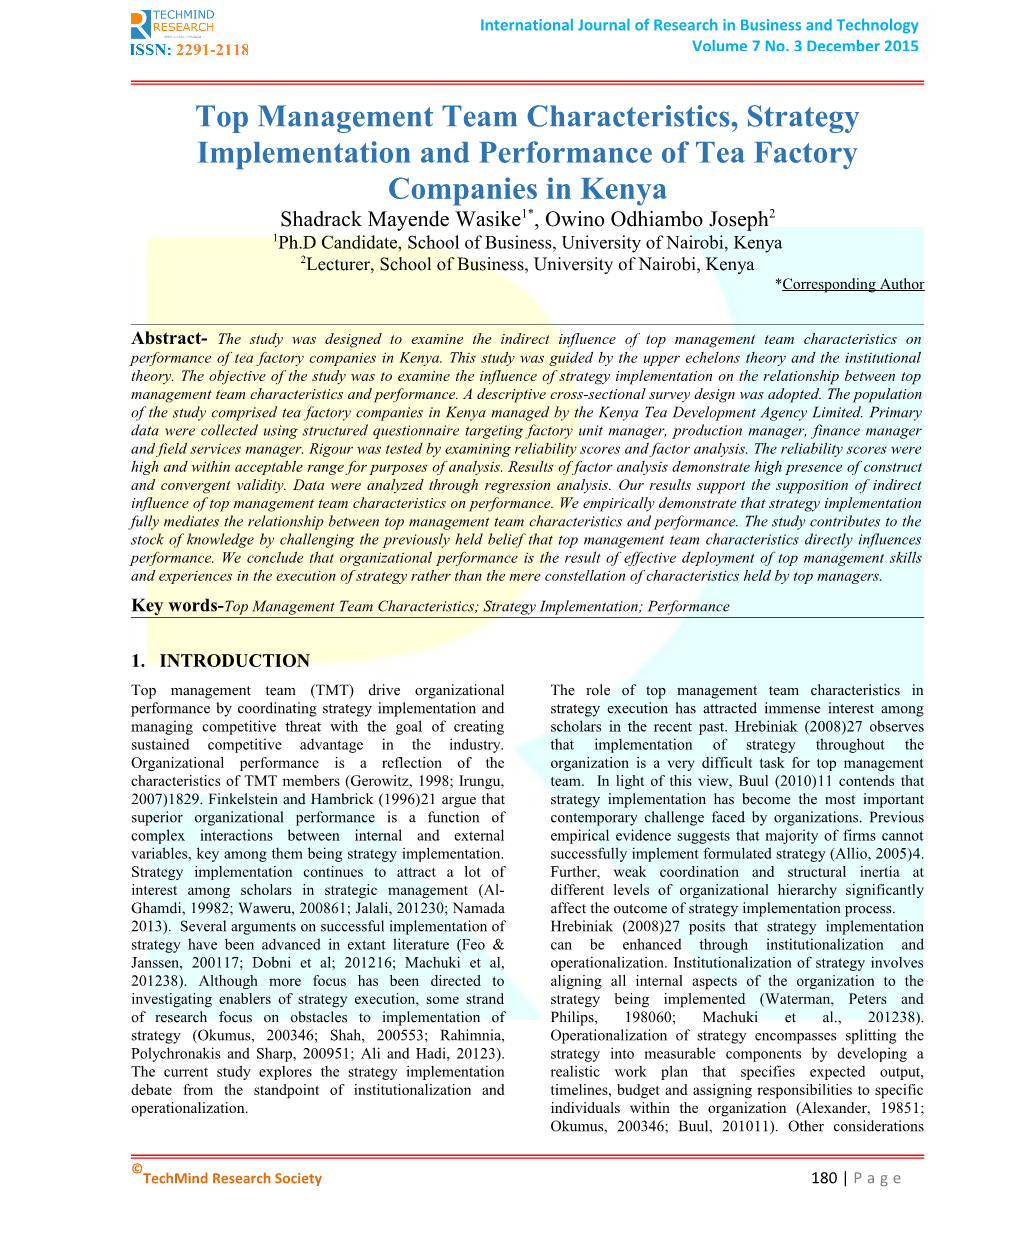 Top Management Team Characteristics, Strategy Implementation and Performance of Tea Factory